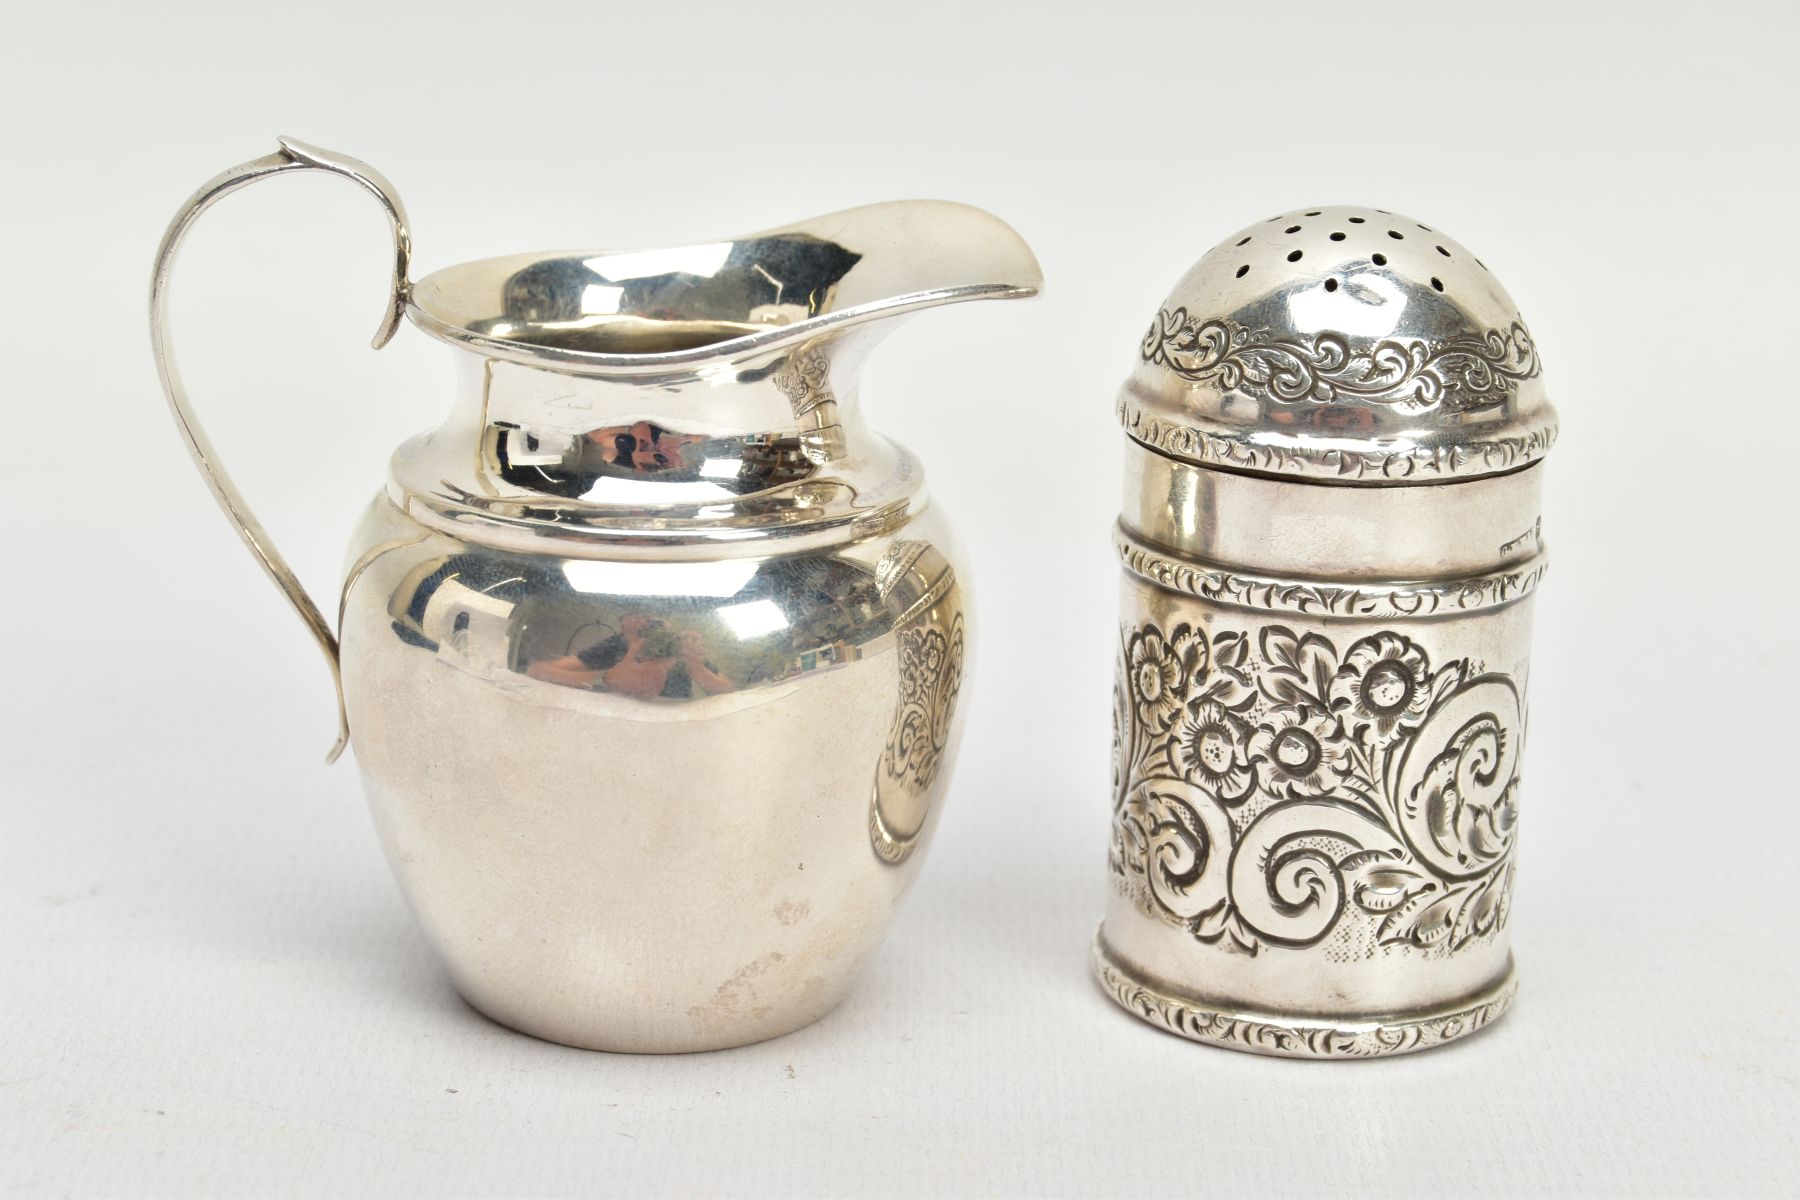 A LATE VICTORIAN PEPPER POT AND AN EDWARDIAN SILVER JUG, the first a late Victorian engraved